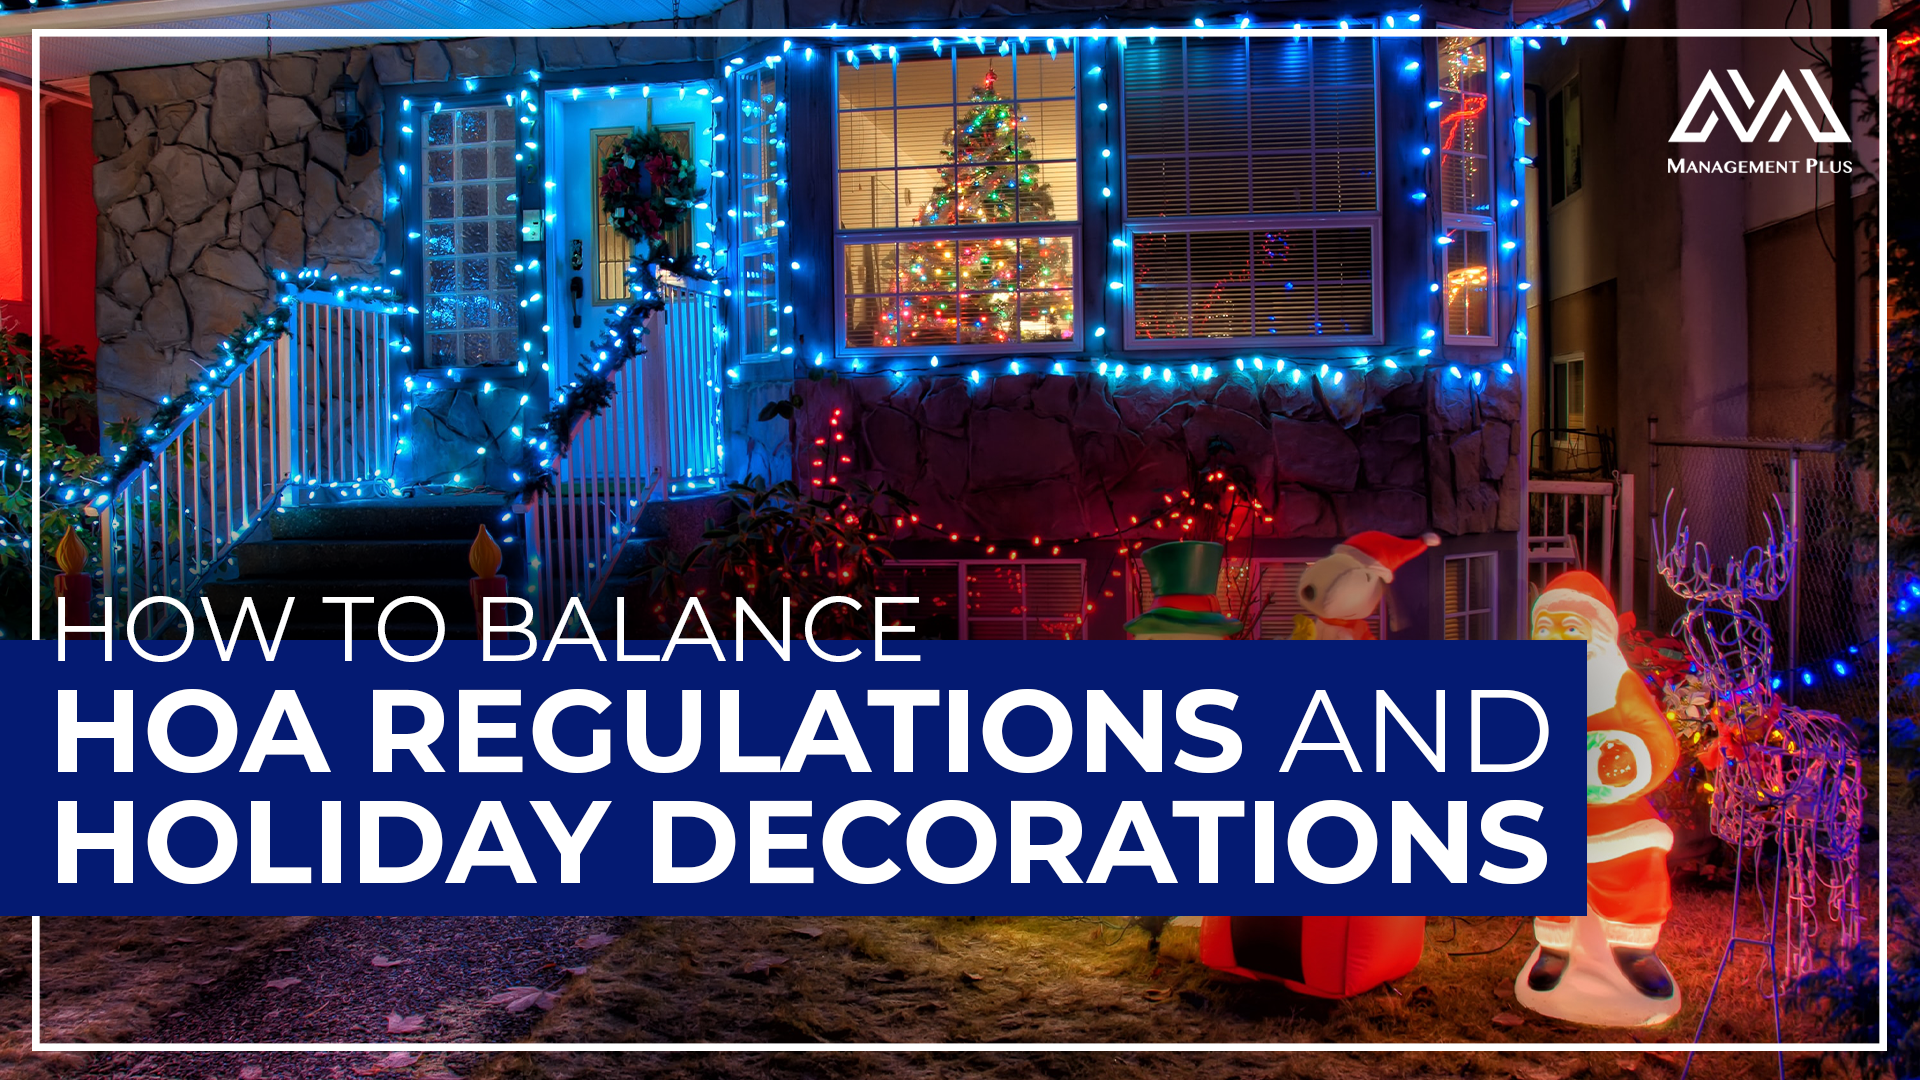 A house with holiday lights. The text reads, "How to Balance HOA Regulations and Holiday Decorations" 